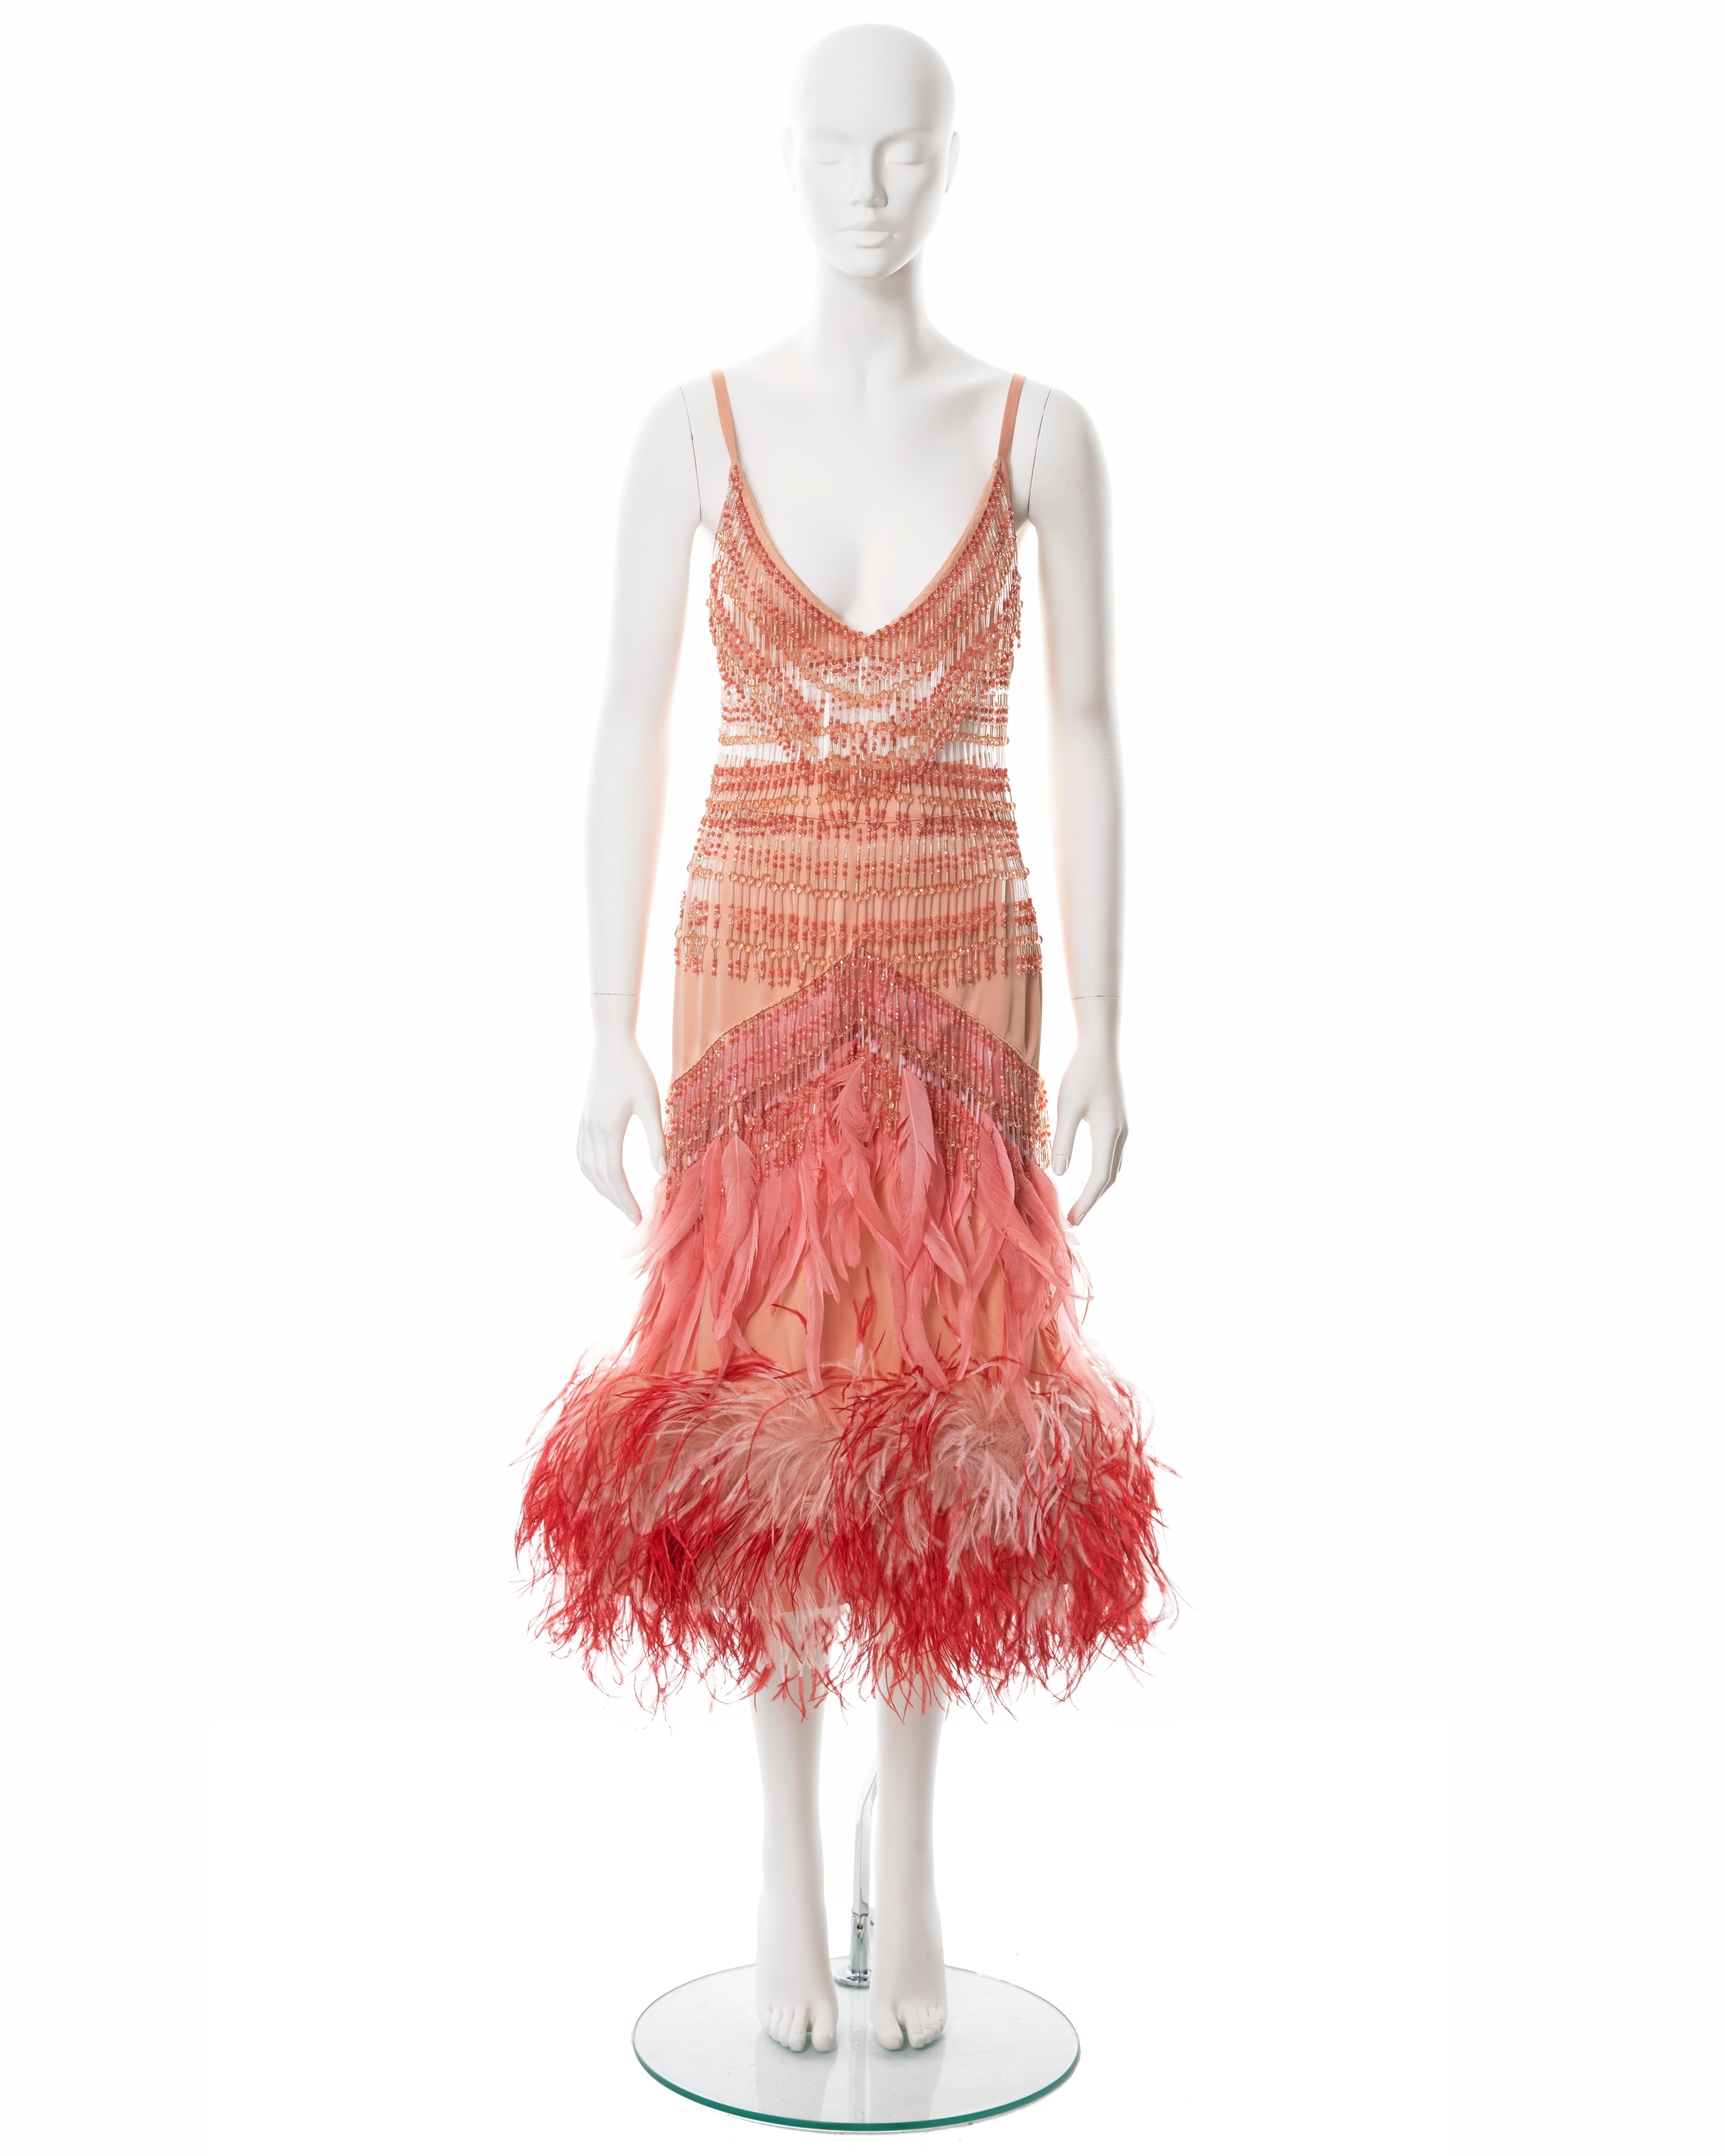 ▪ Prada evening bra and skirt ensemble 
▪ Designed by Miuccia Prada
▪ Fall-Winter 2017
▪ Constructed from salmon silk 
▪ Beaded fringe trim 
▪ Pink ostrich and turkey feather embellishments 
▪ Marked size '38', Bust: 32.5 - 34